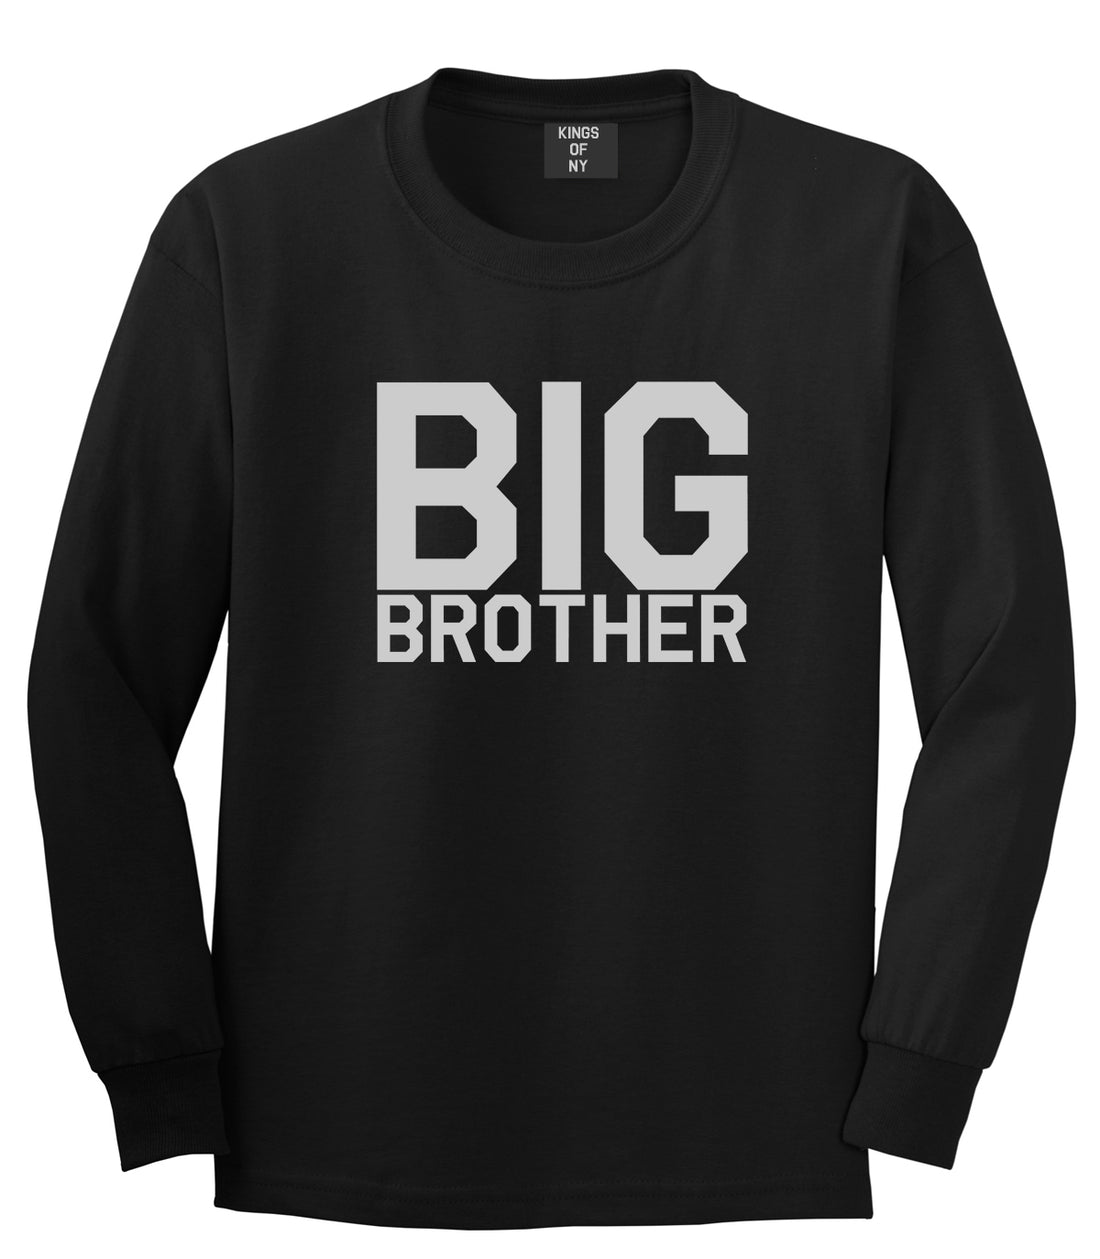 Big Brother Black Long Sleeve T-Shirt by Kings Of NY